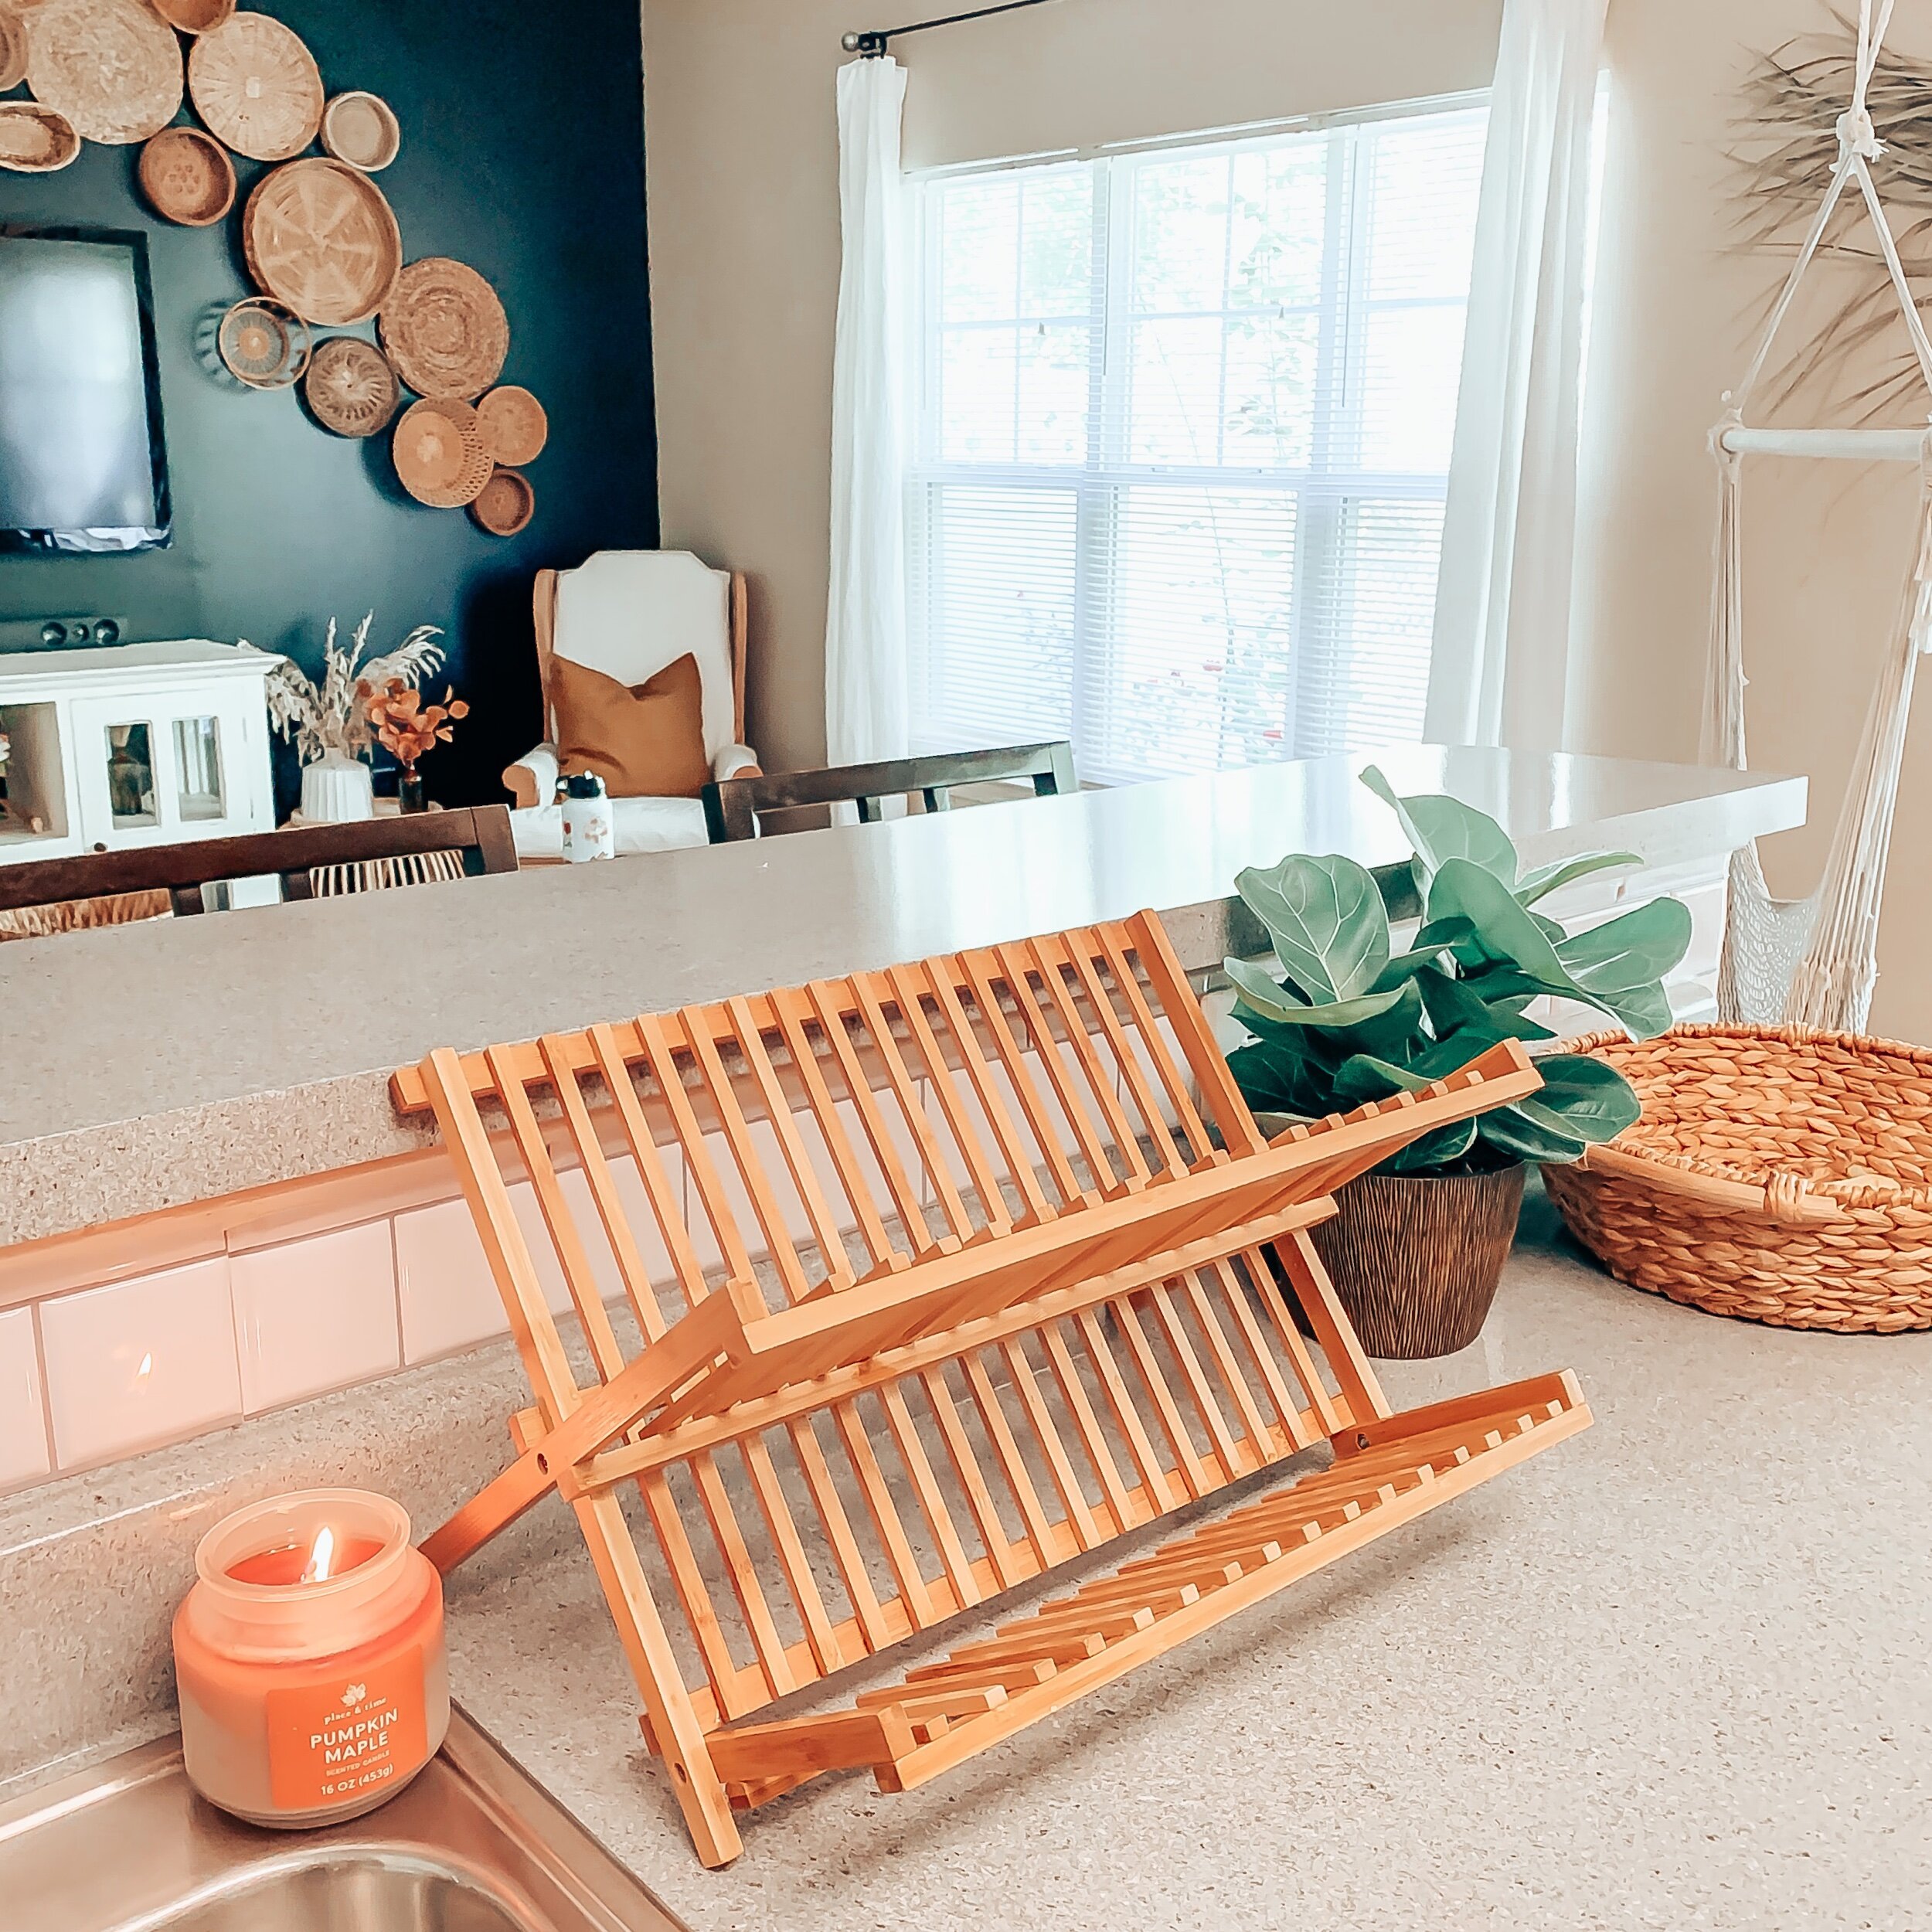 This beautiful bamboo dish rack is also from honey-can-do, click here to shop!